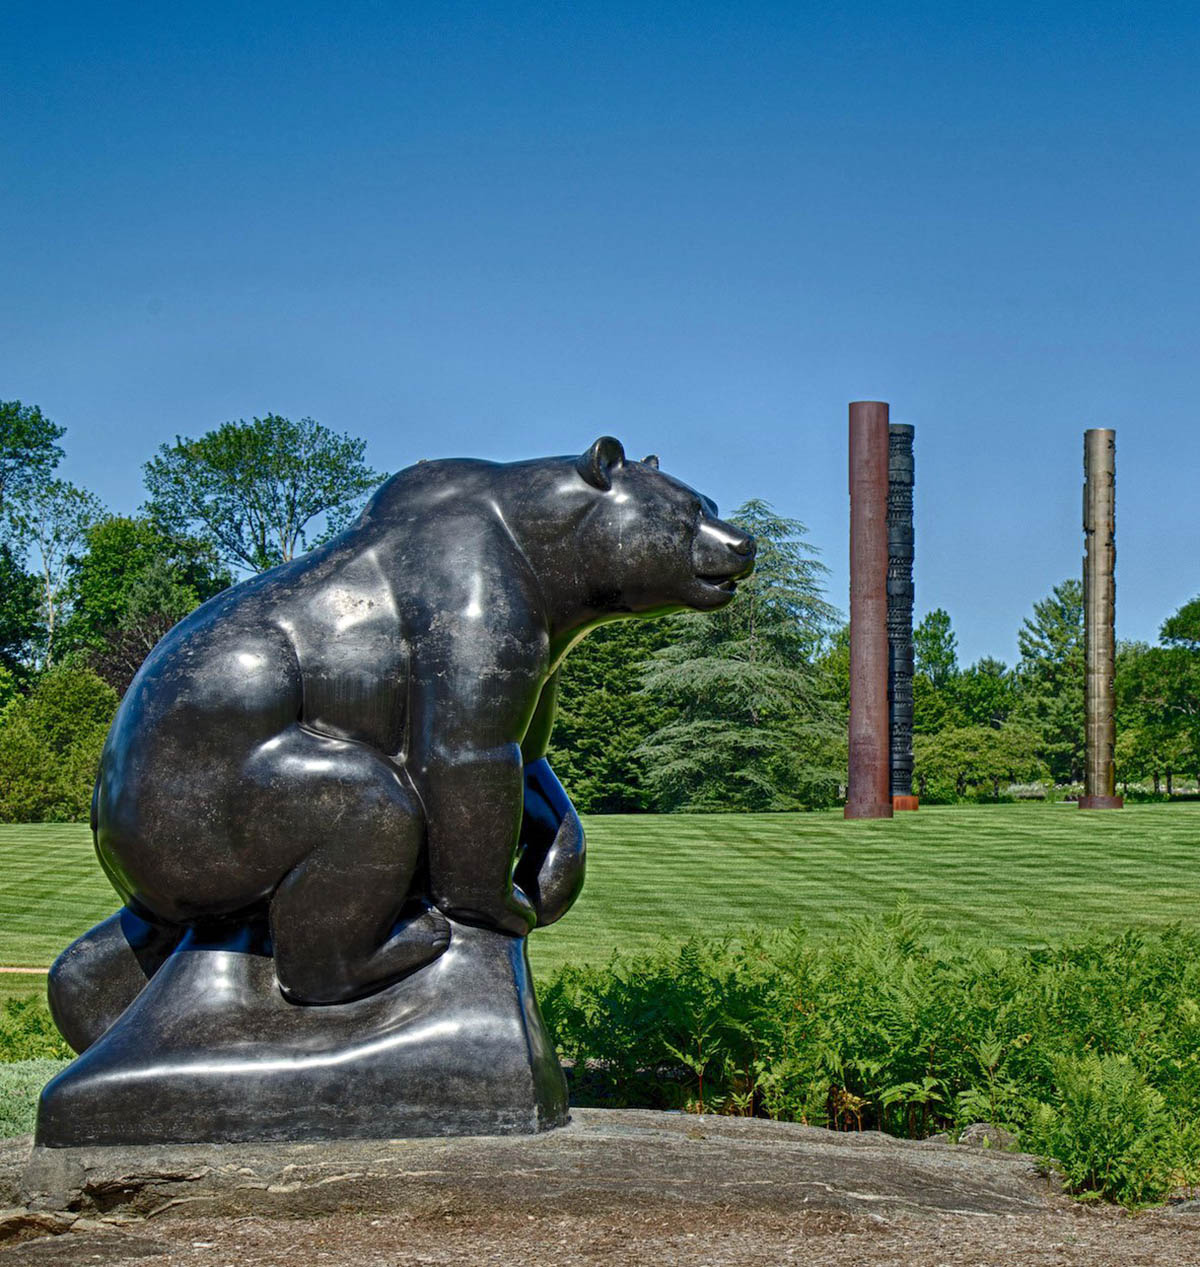 David Wynne's "Grizzly Bear" stands on the shore of the lake with Arnaldo Pomodoro's "Triad" in the distance